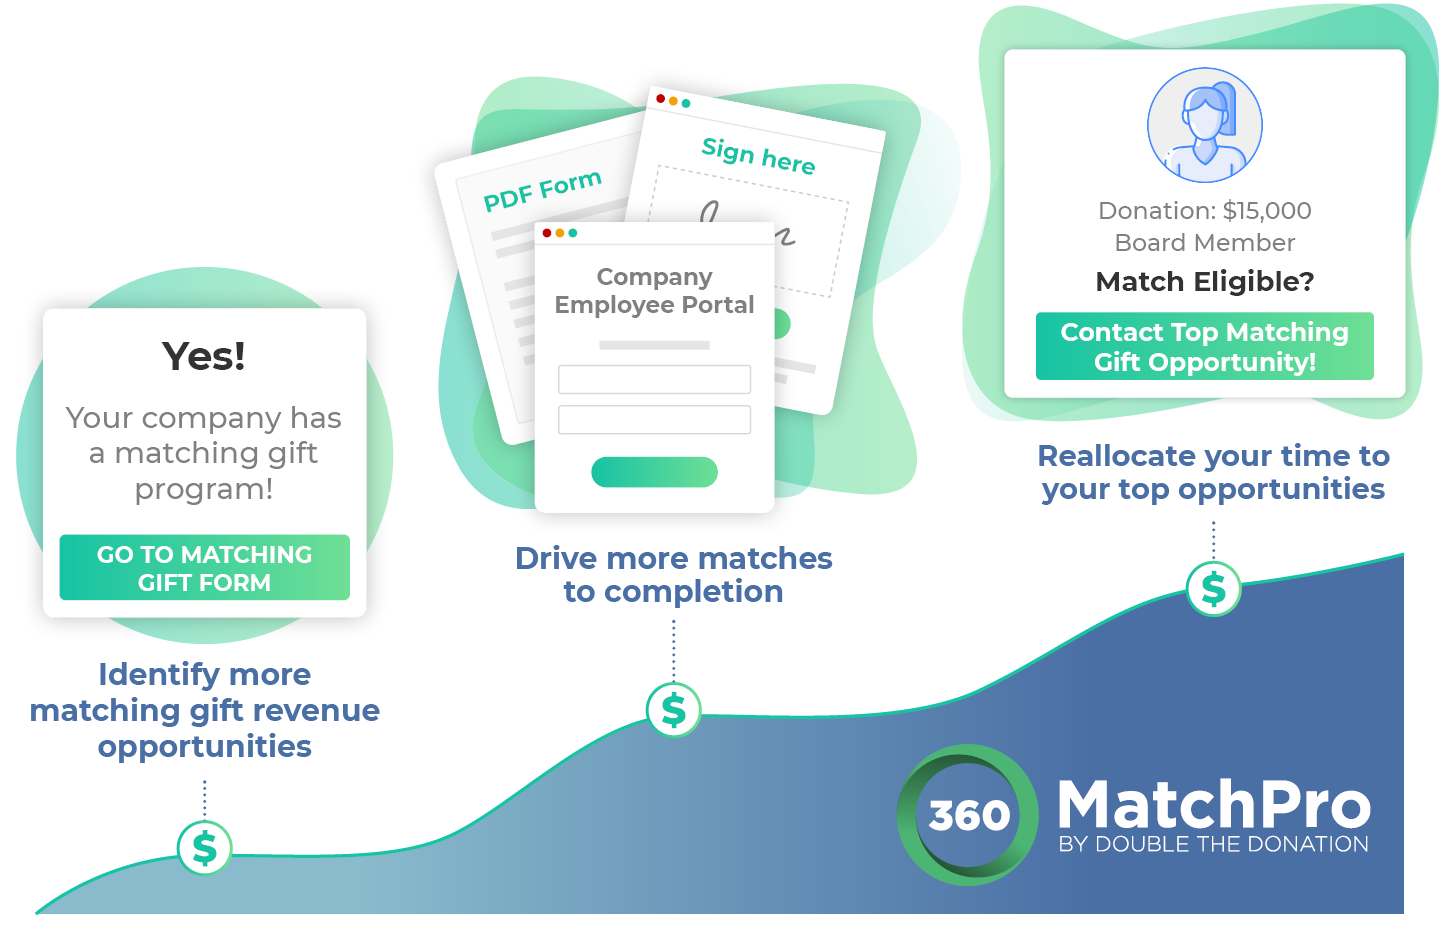 This image explains the 360MatchPro features listed above alongside an increasing graph to represent increasing donations.